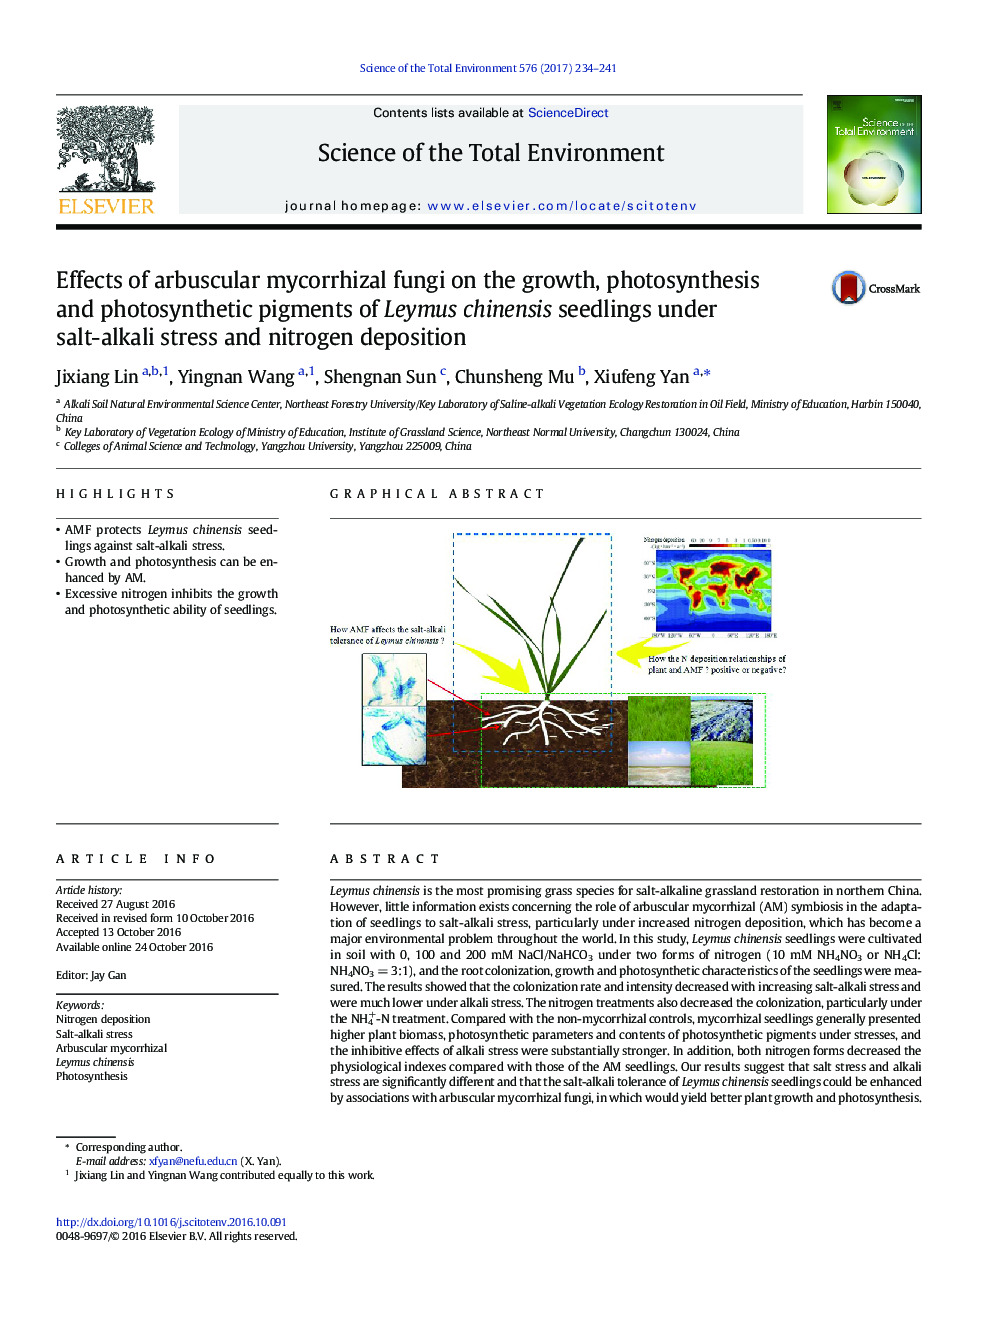 Effects of arbuscular mycorrhizal fungi on the growth, photosynthesis and photosynthetic pigments of Leymus chinensis seedlings under salt-alkali stress and nitrogen deposition